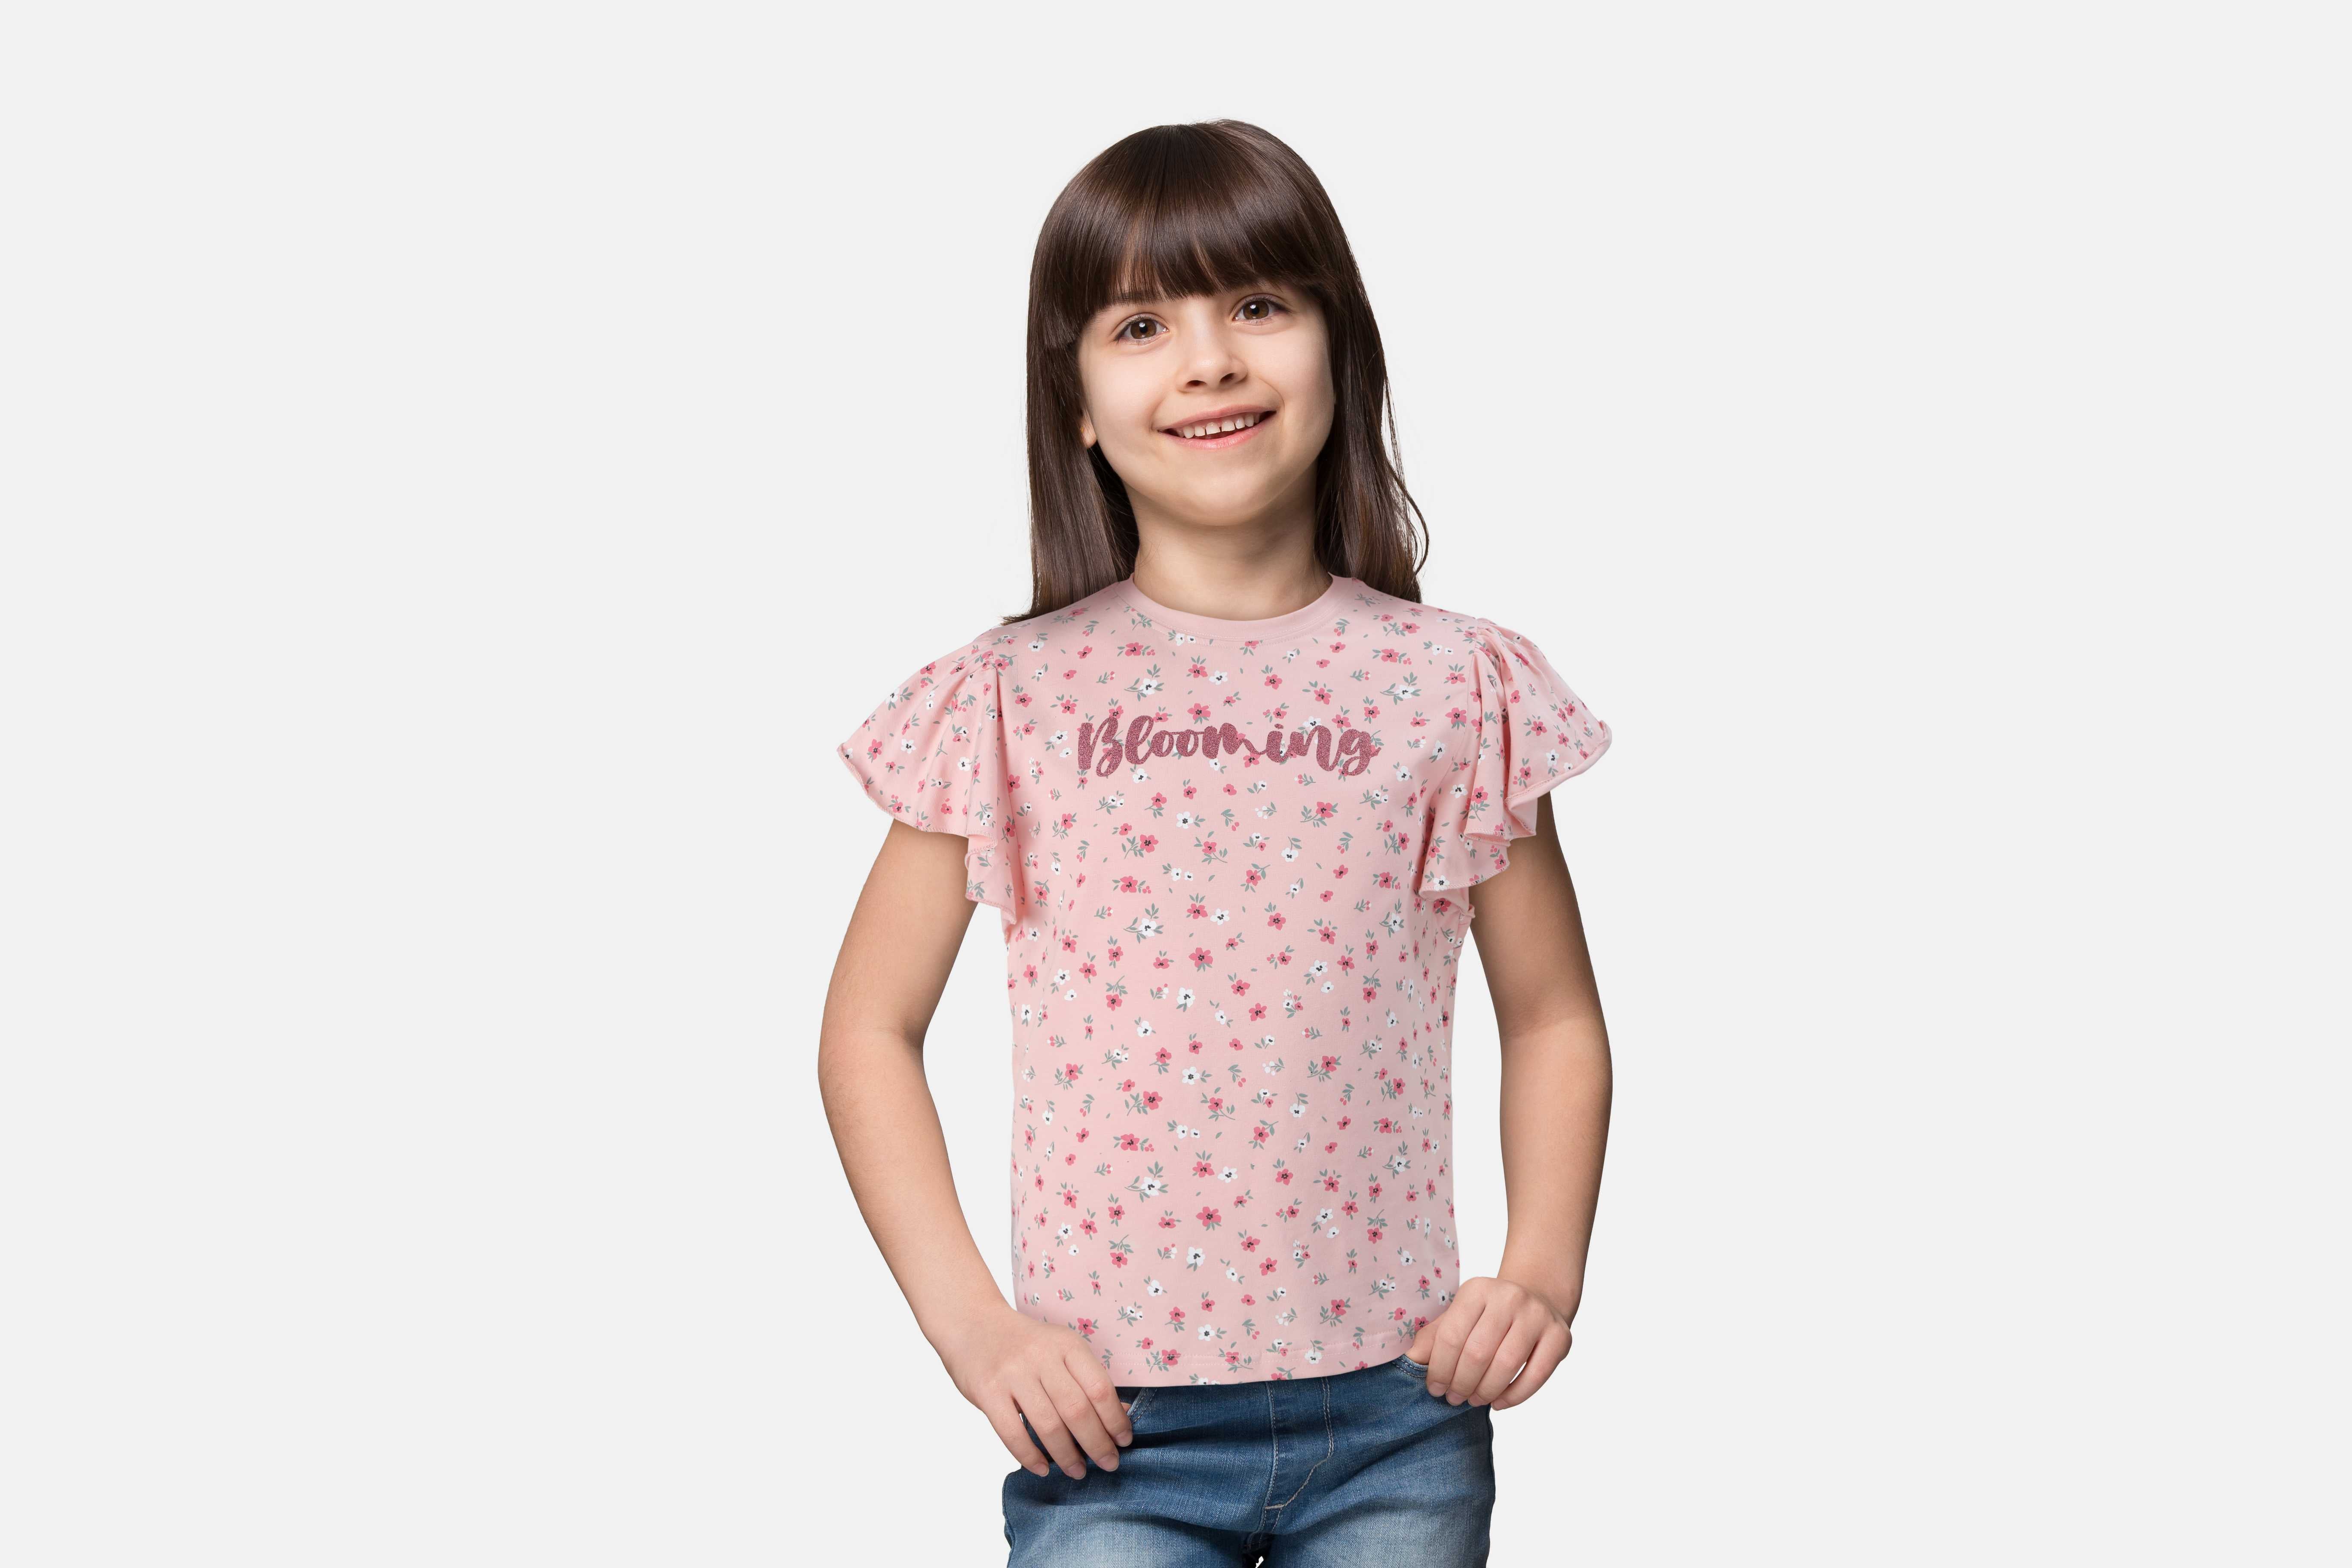 Girls Pink Cotton Solid Knits Top